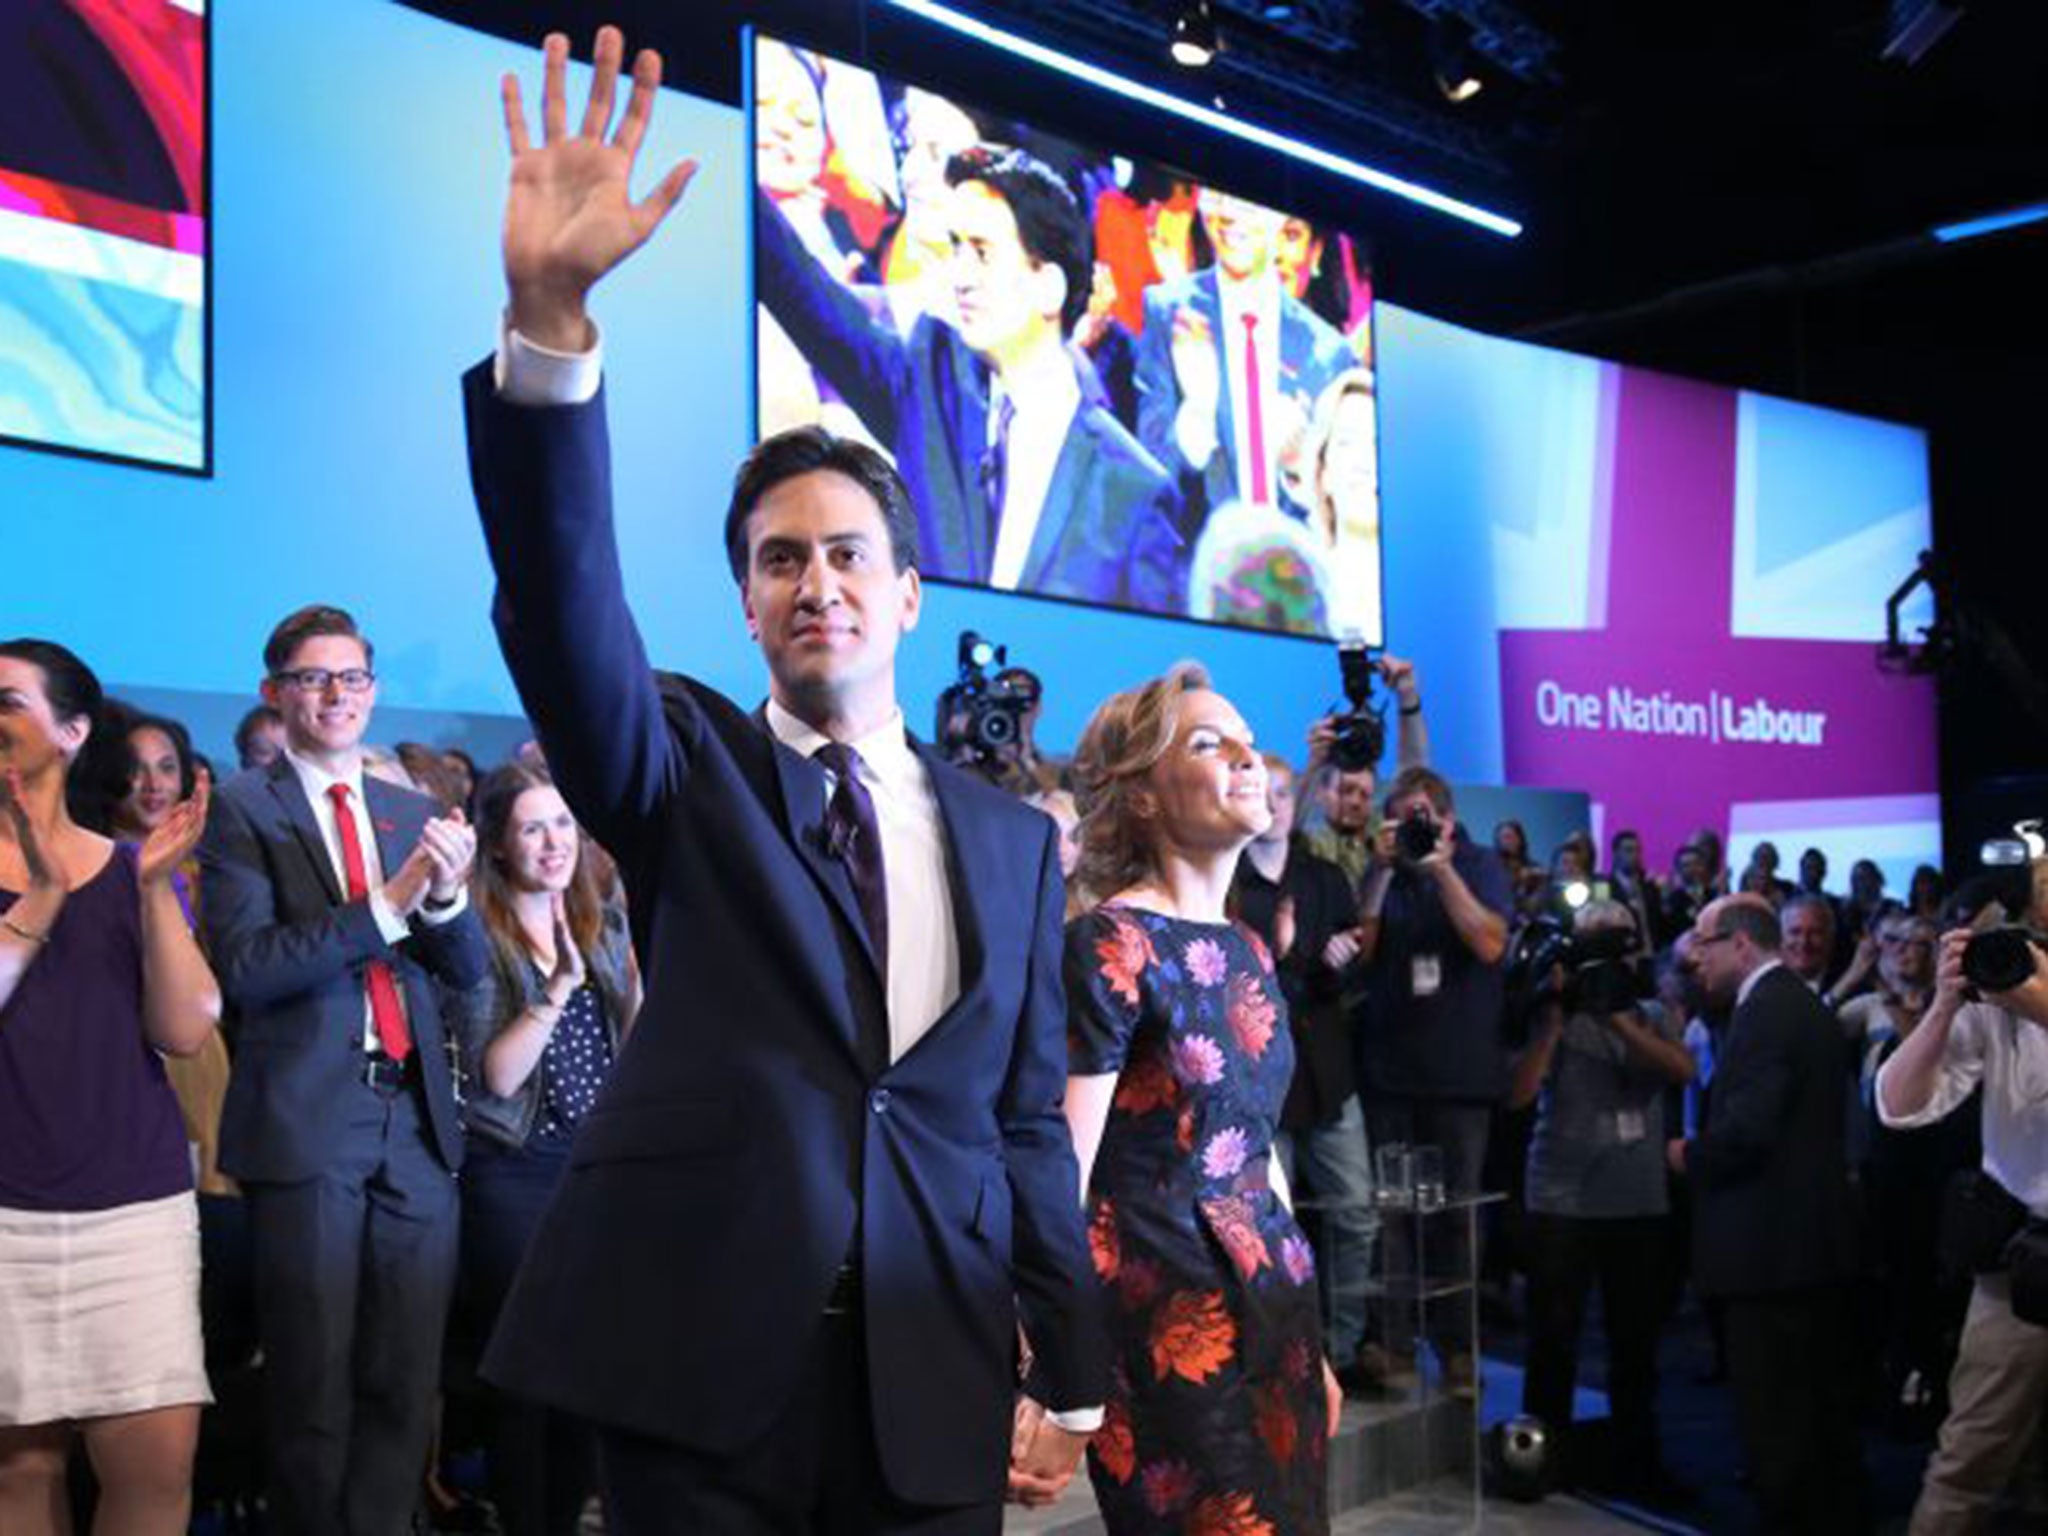 Is Ed Miliband a natural born leader? Or could he become one?